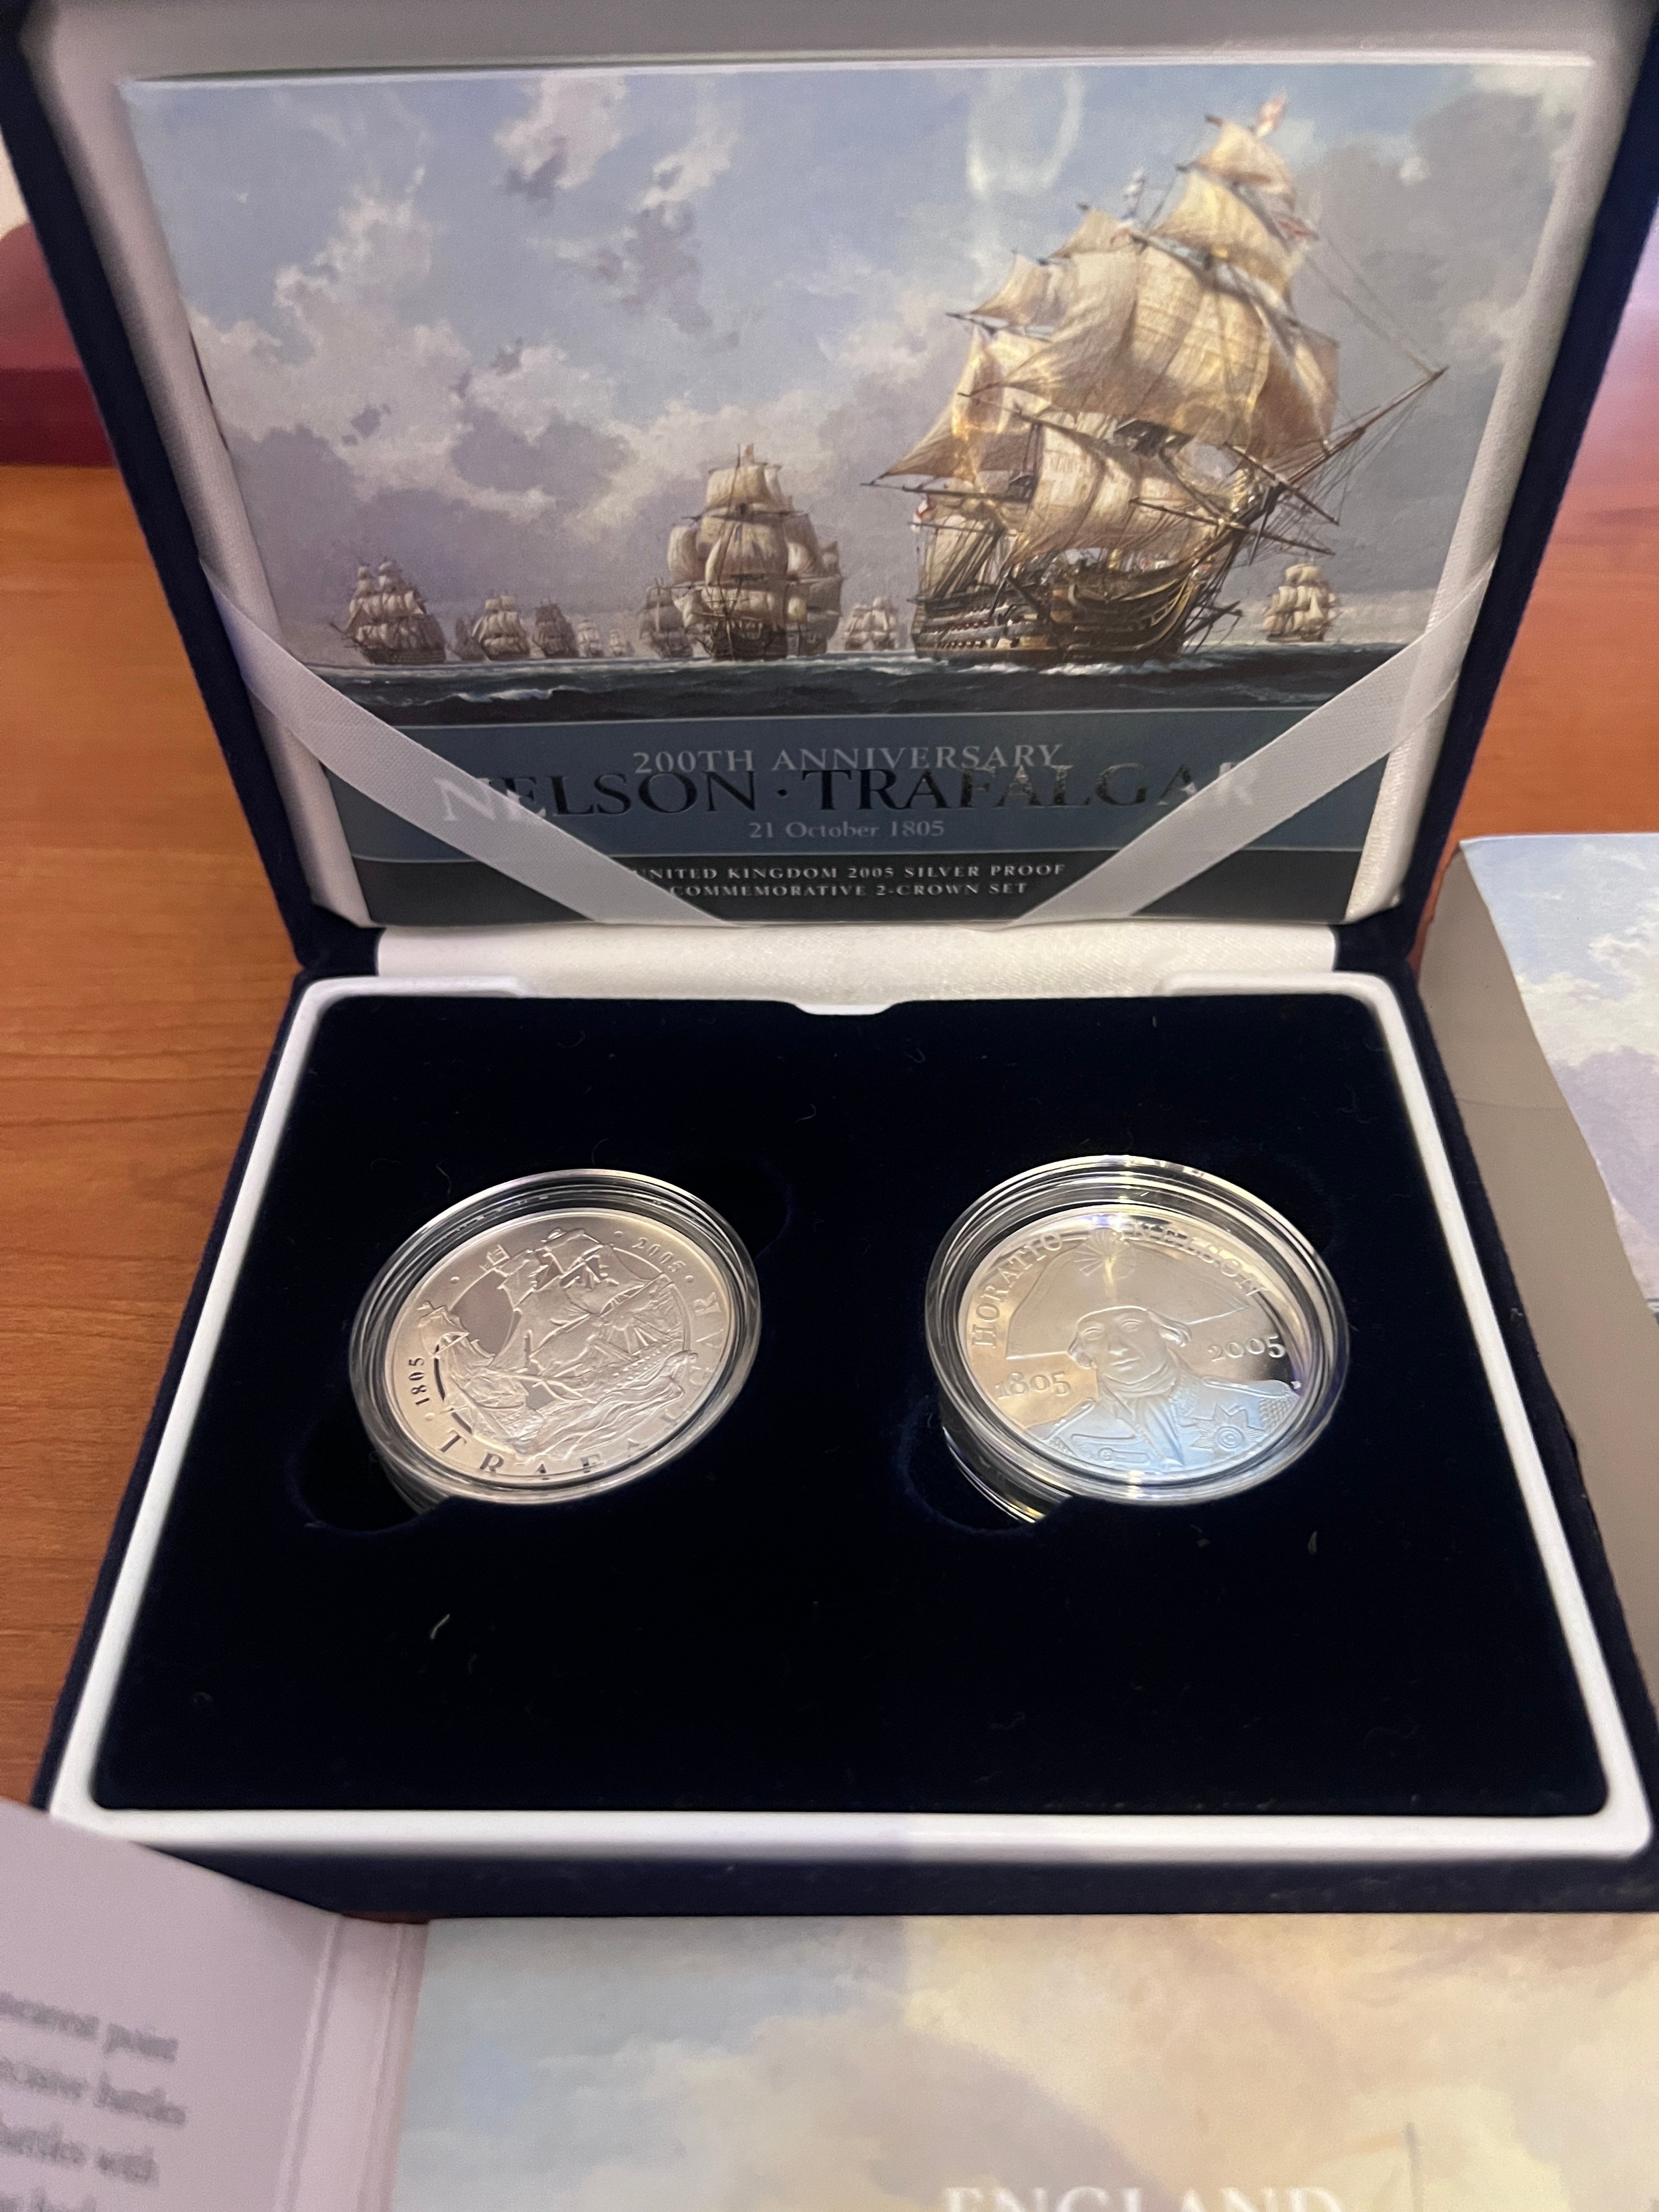 A cased silver proof 200th Anniversary Nelson - Trafalgar 2 crown commemorative set with certificate - Image 3 of 3